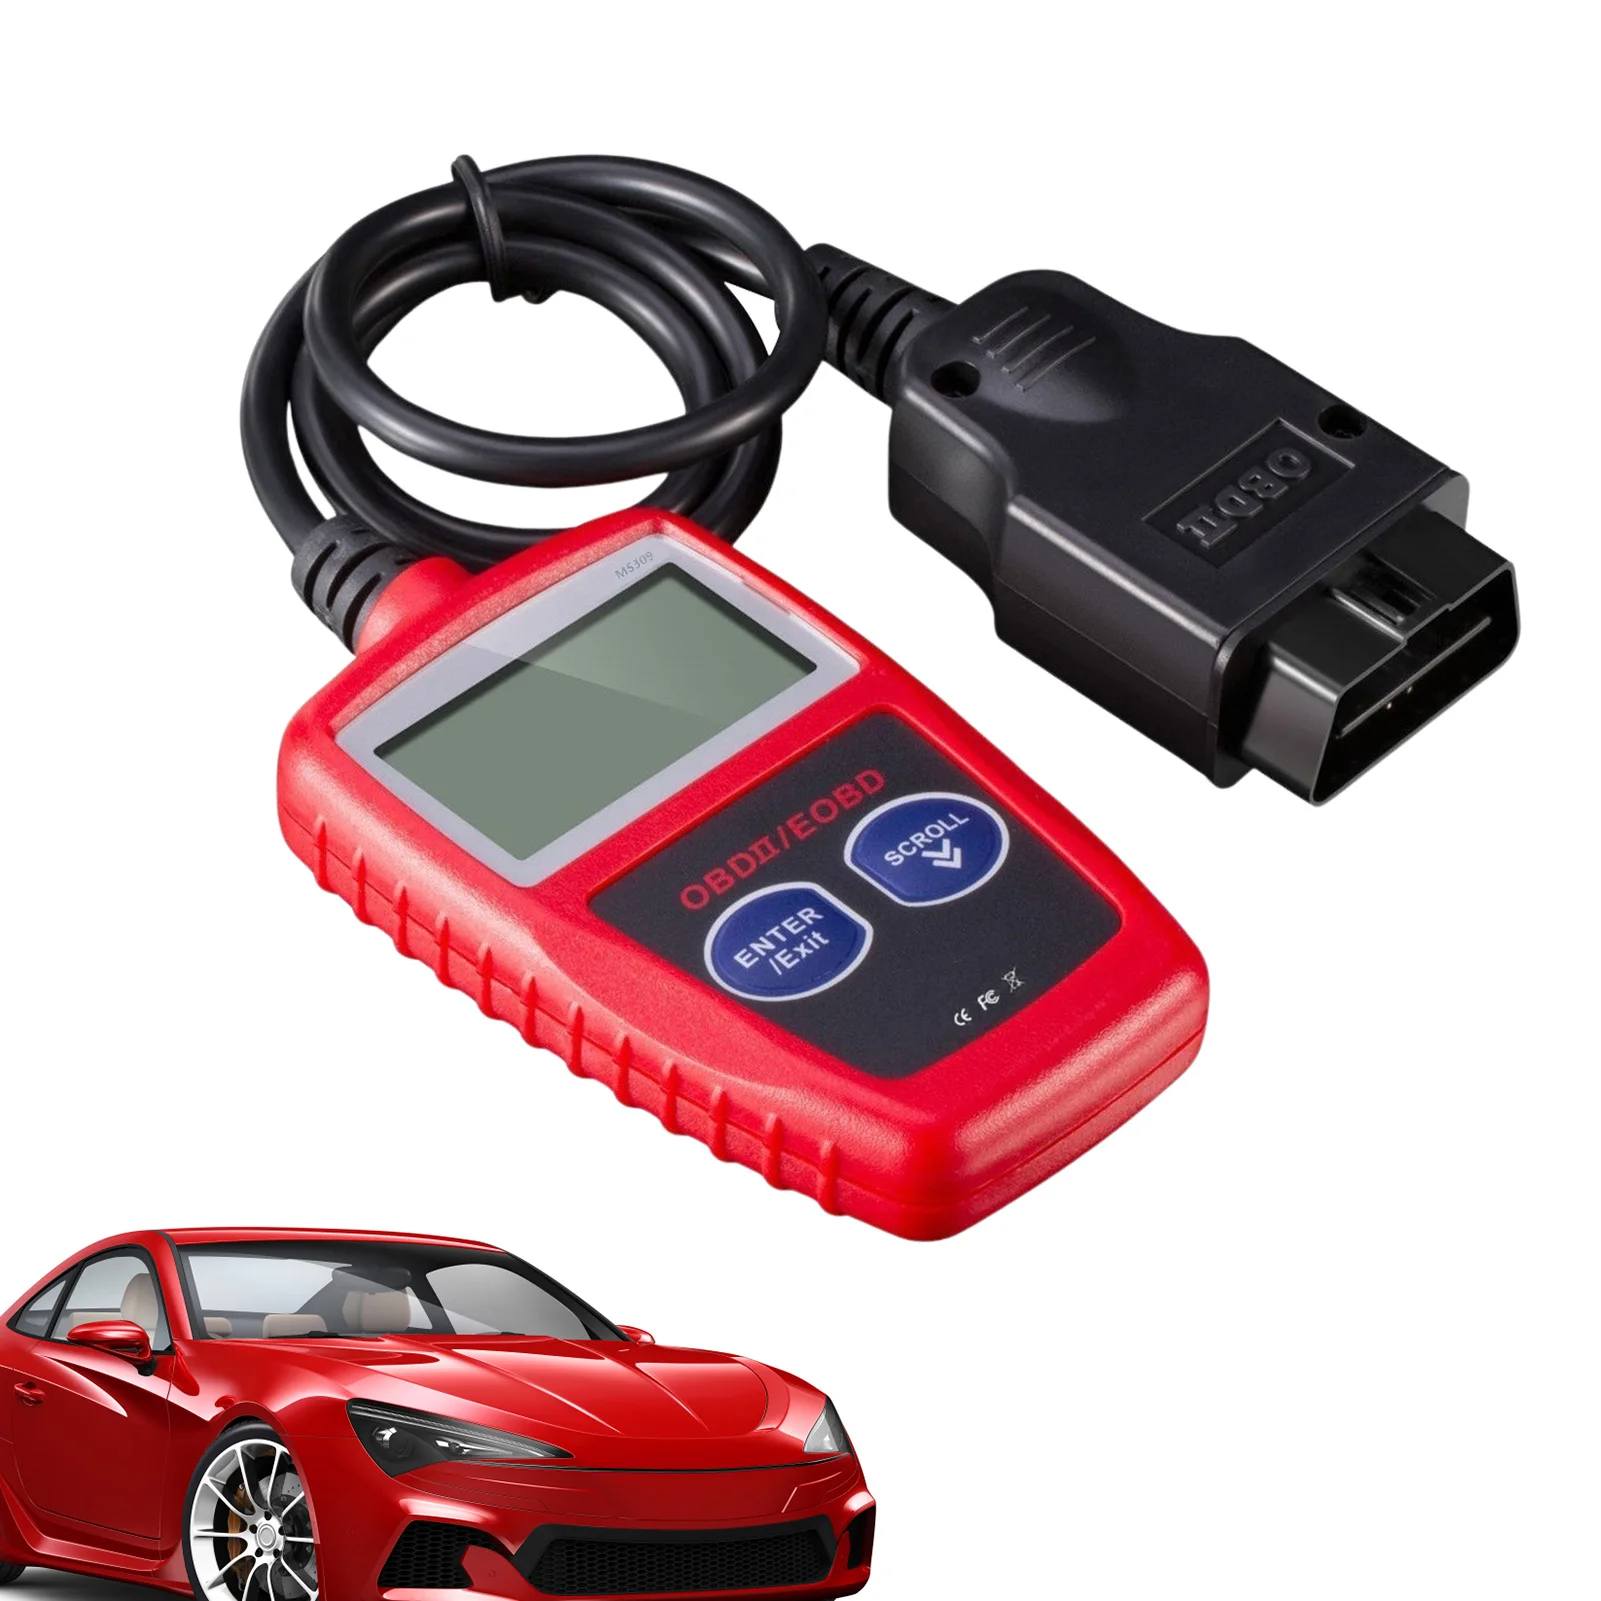 

Car Diagnostic Tool MS309 OBD2 Scanner Vehicle Code Reader Check Engine Read Erase Fault Codes Powerful Scan With LCD Display